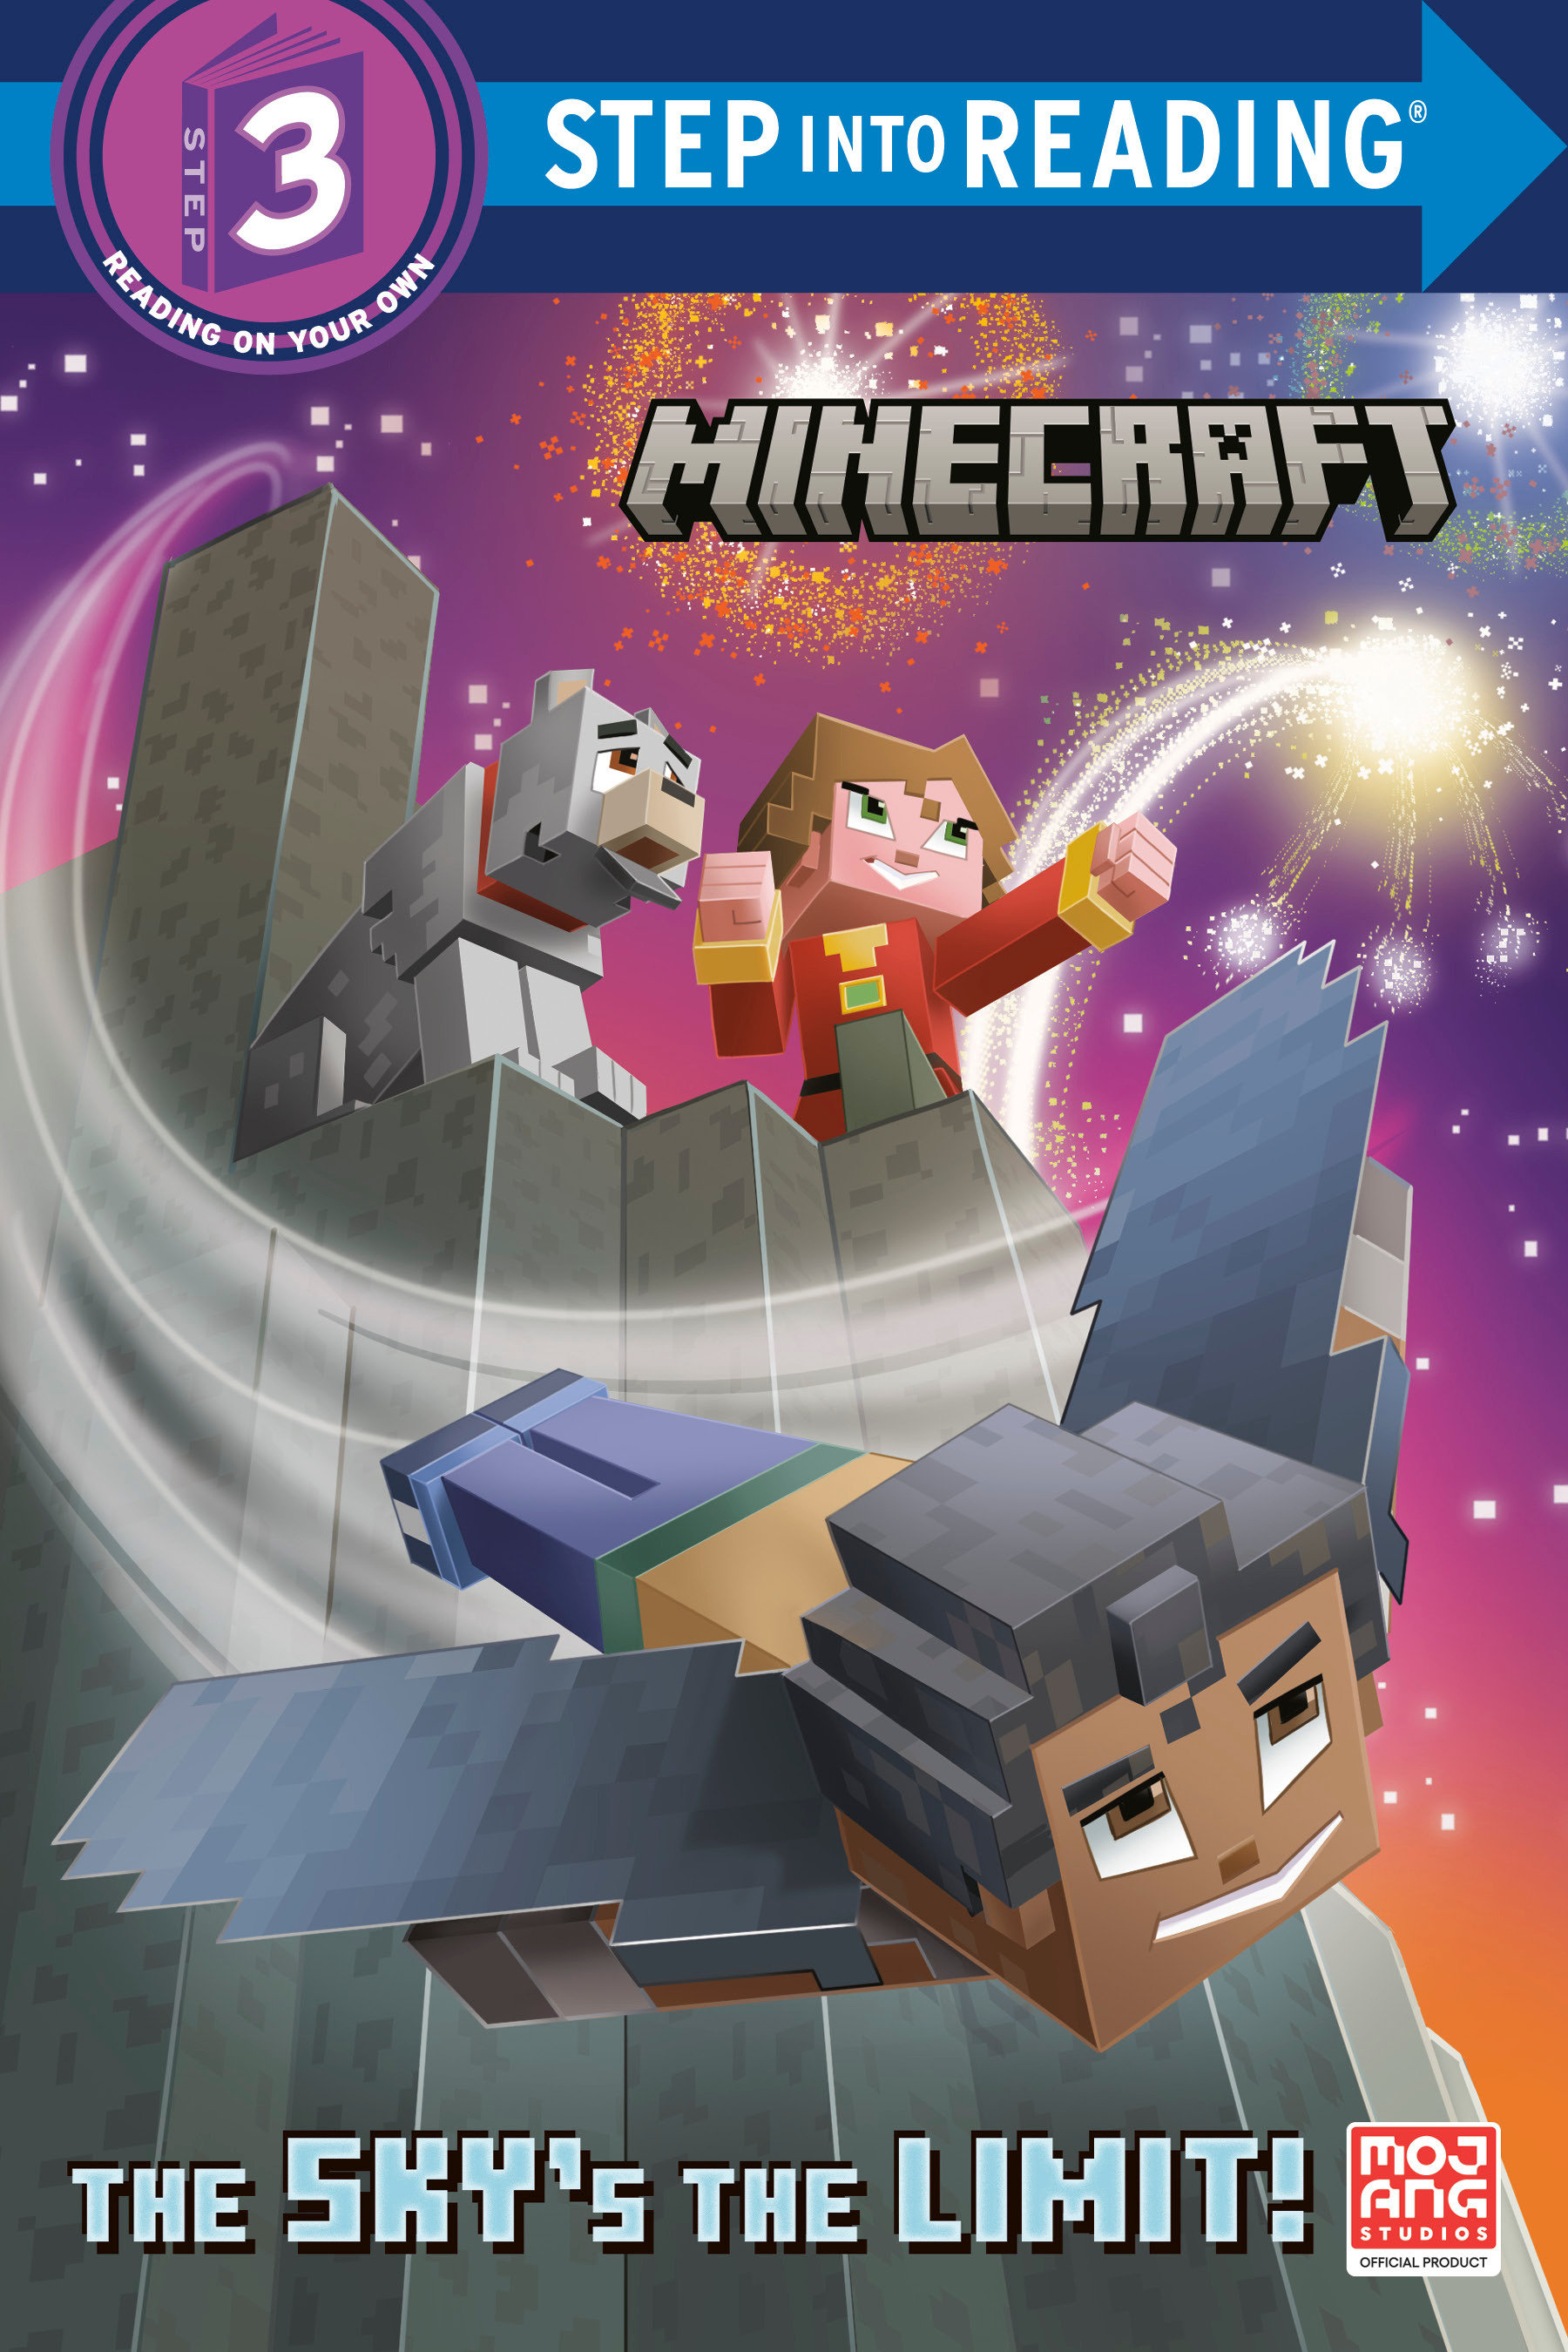 The Sky's the Limit! Minecraft Step Into Reading